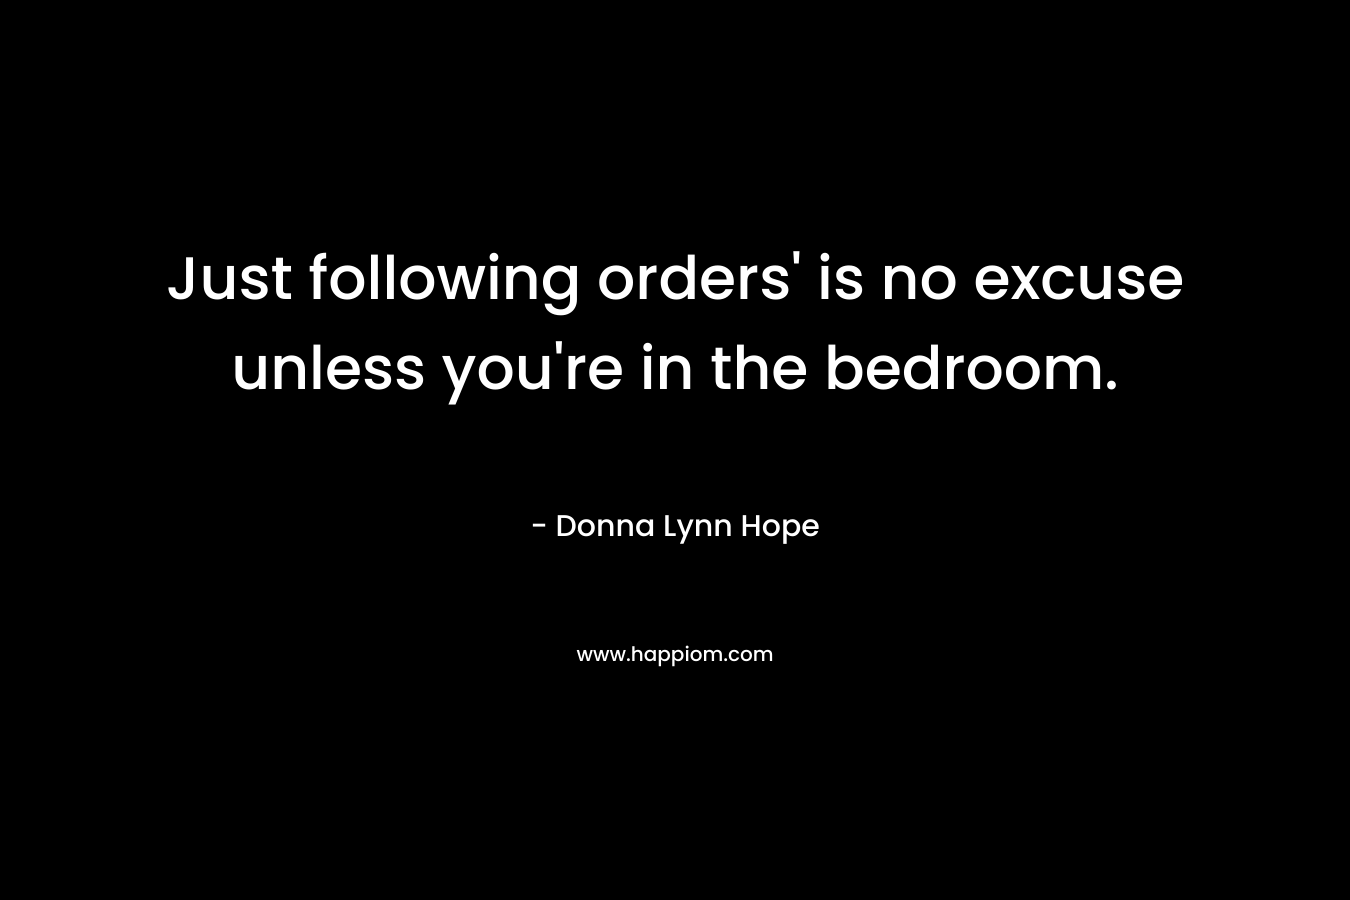 Just following orders’ is no excuse unless you’re in the bedroom. – Donna Lynn Hope